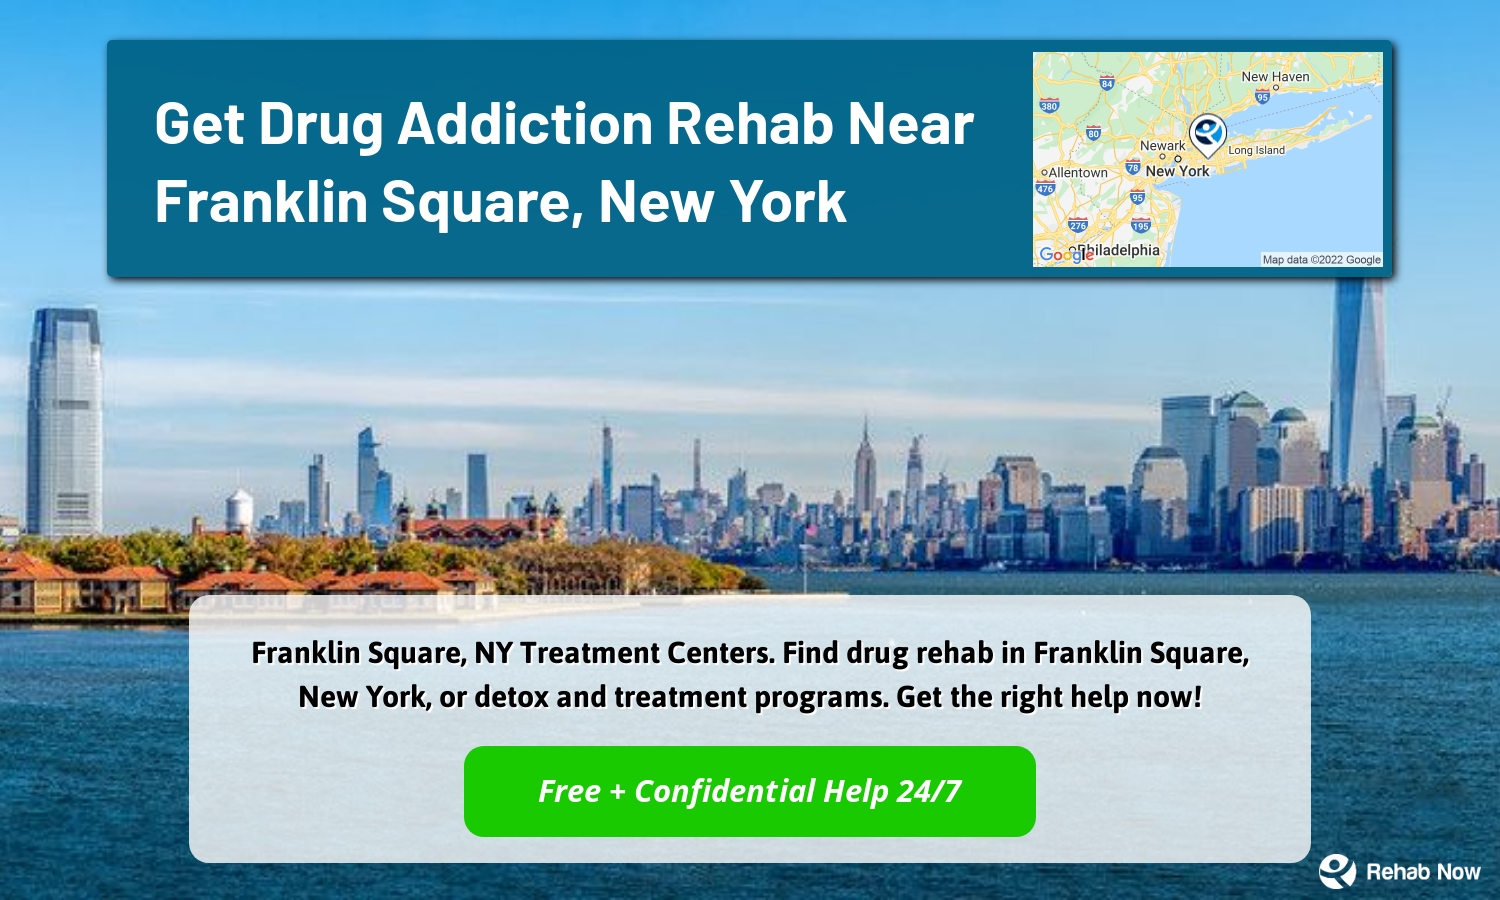 Franklin Square, NY Treatment Centers. Find drug rehab in Franklin Square, New York, or detox and treatment programs. Get the right help now!